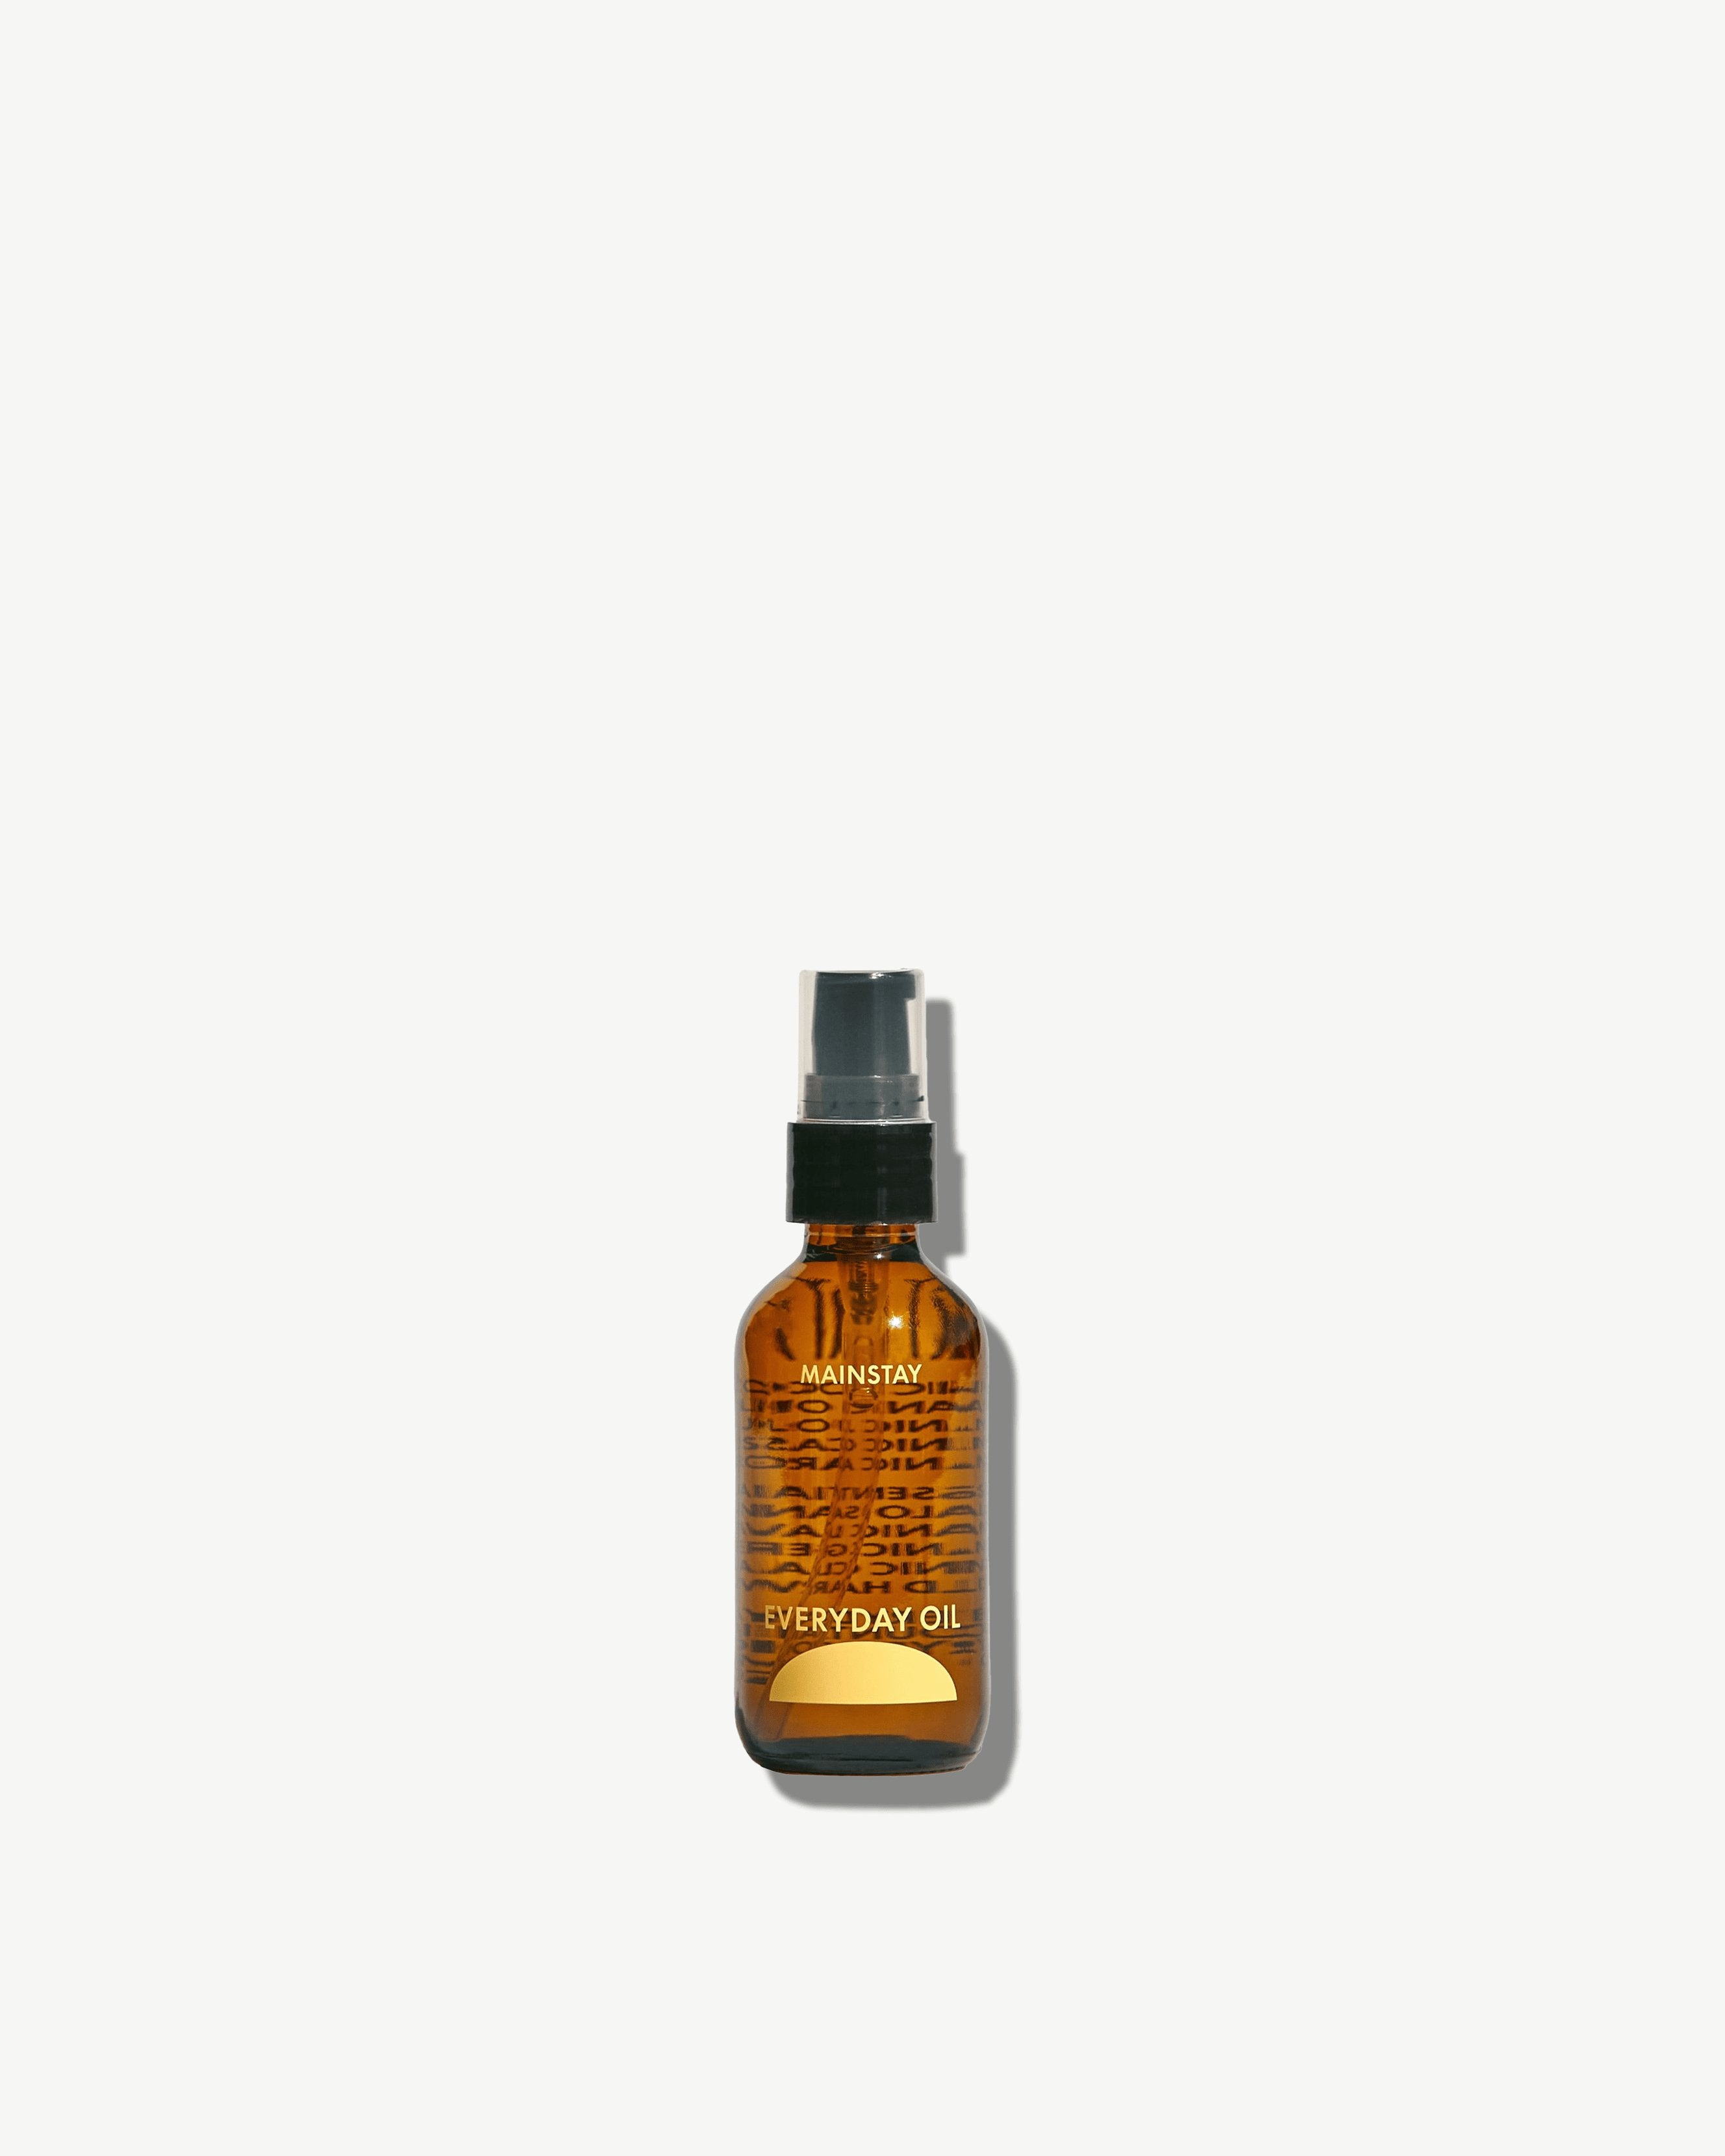 Everyday Oil, Mainstay Blend